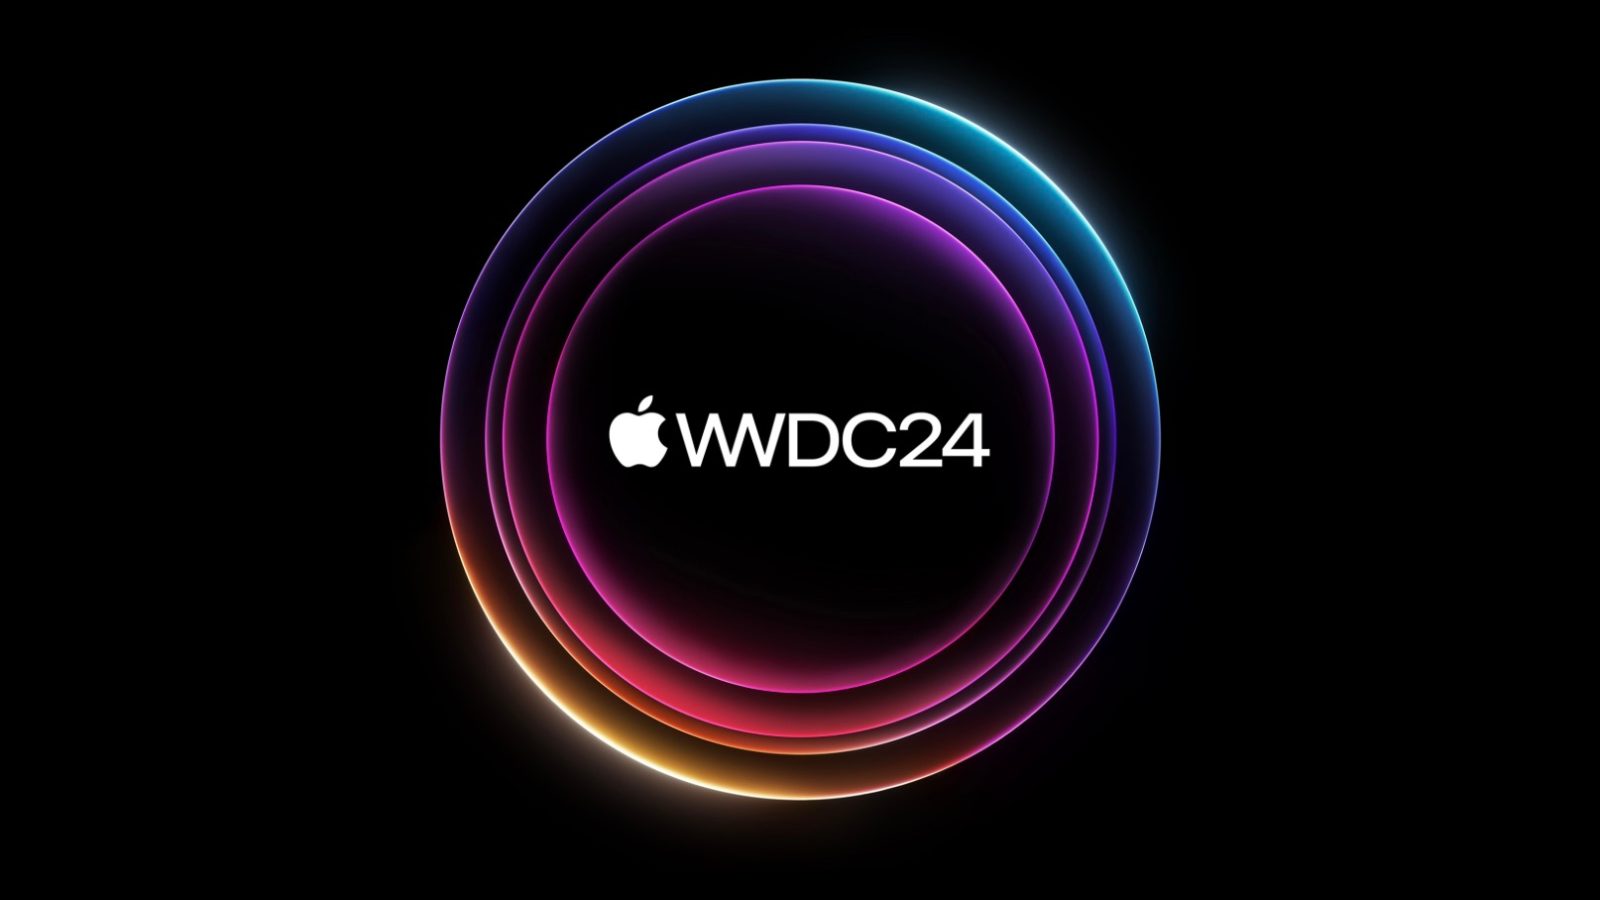 Apply for WWDC24 inperson event 9to5Mac